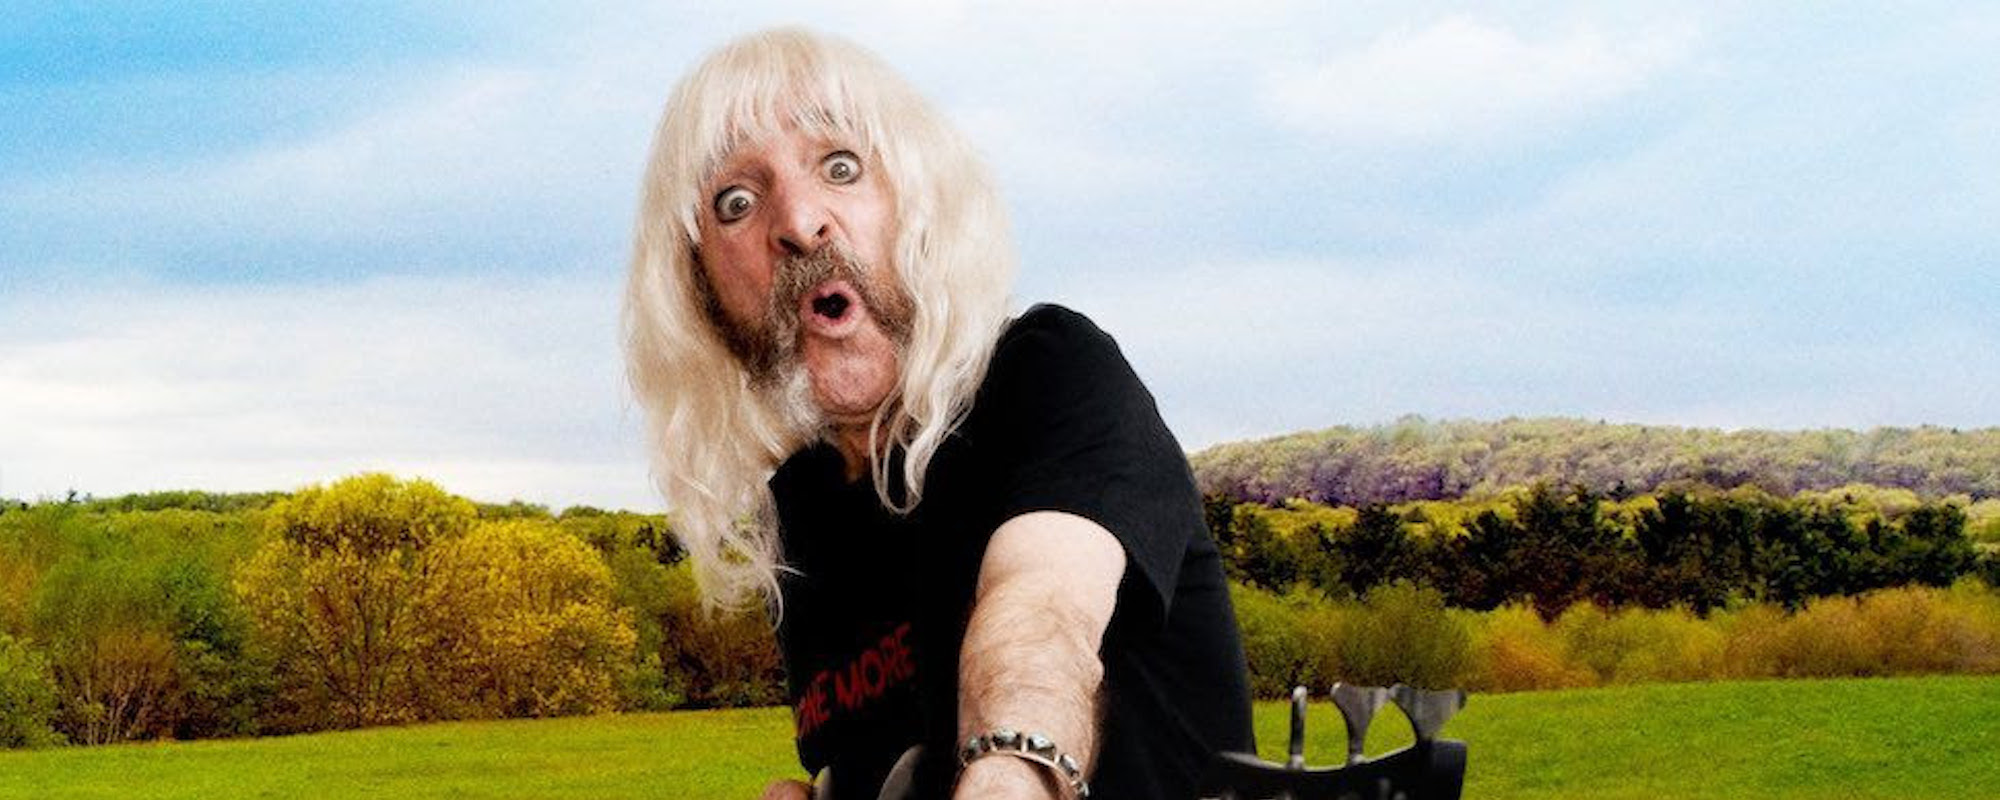 Spinal Tap’s Derek Smalls is Ready to “Crush Barbie” with New Single